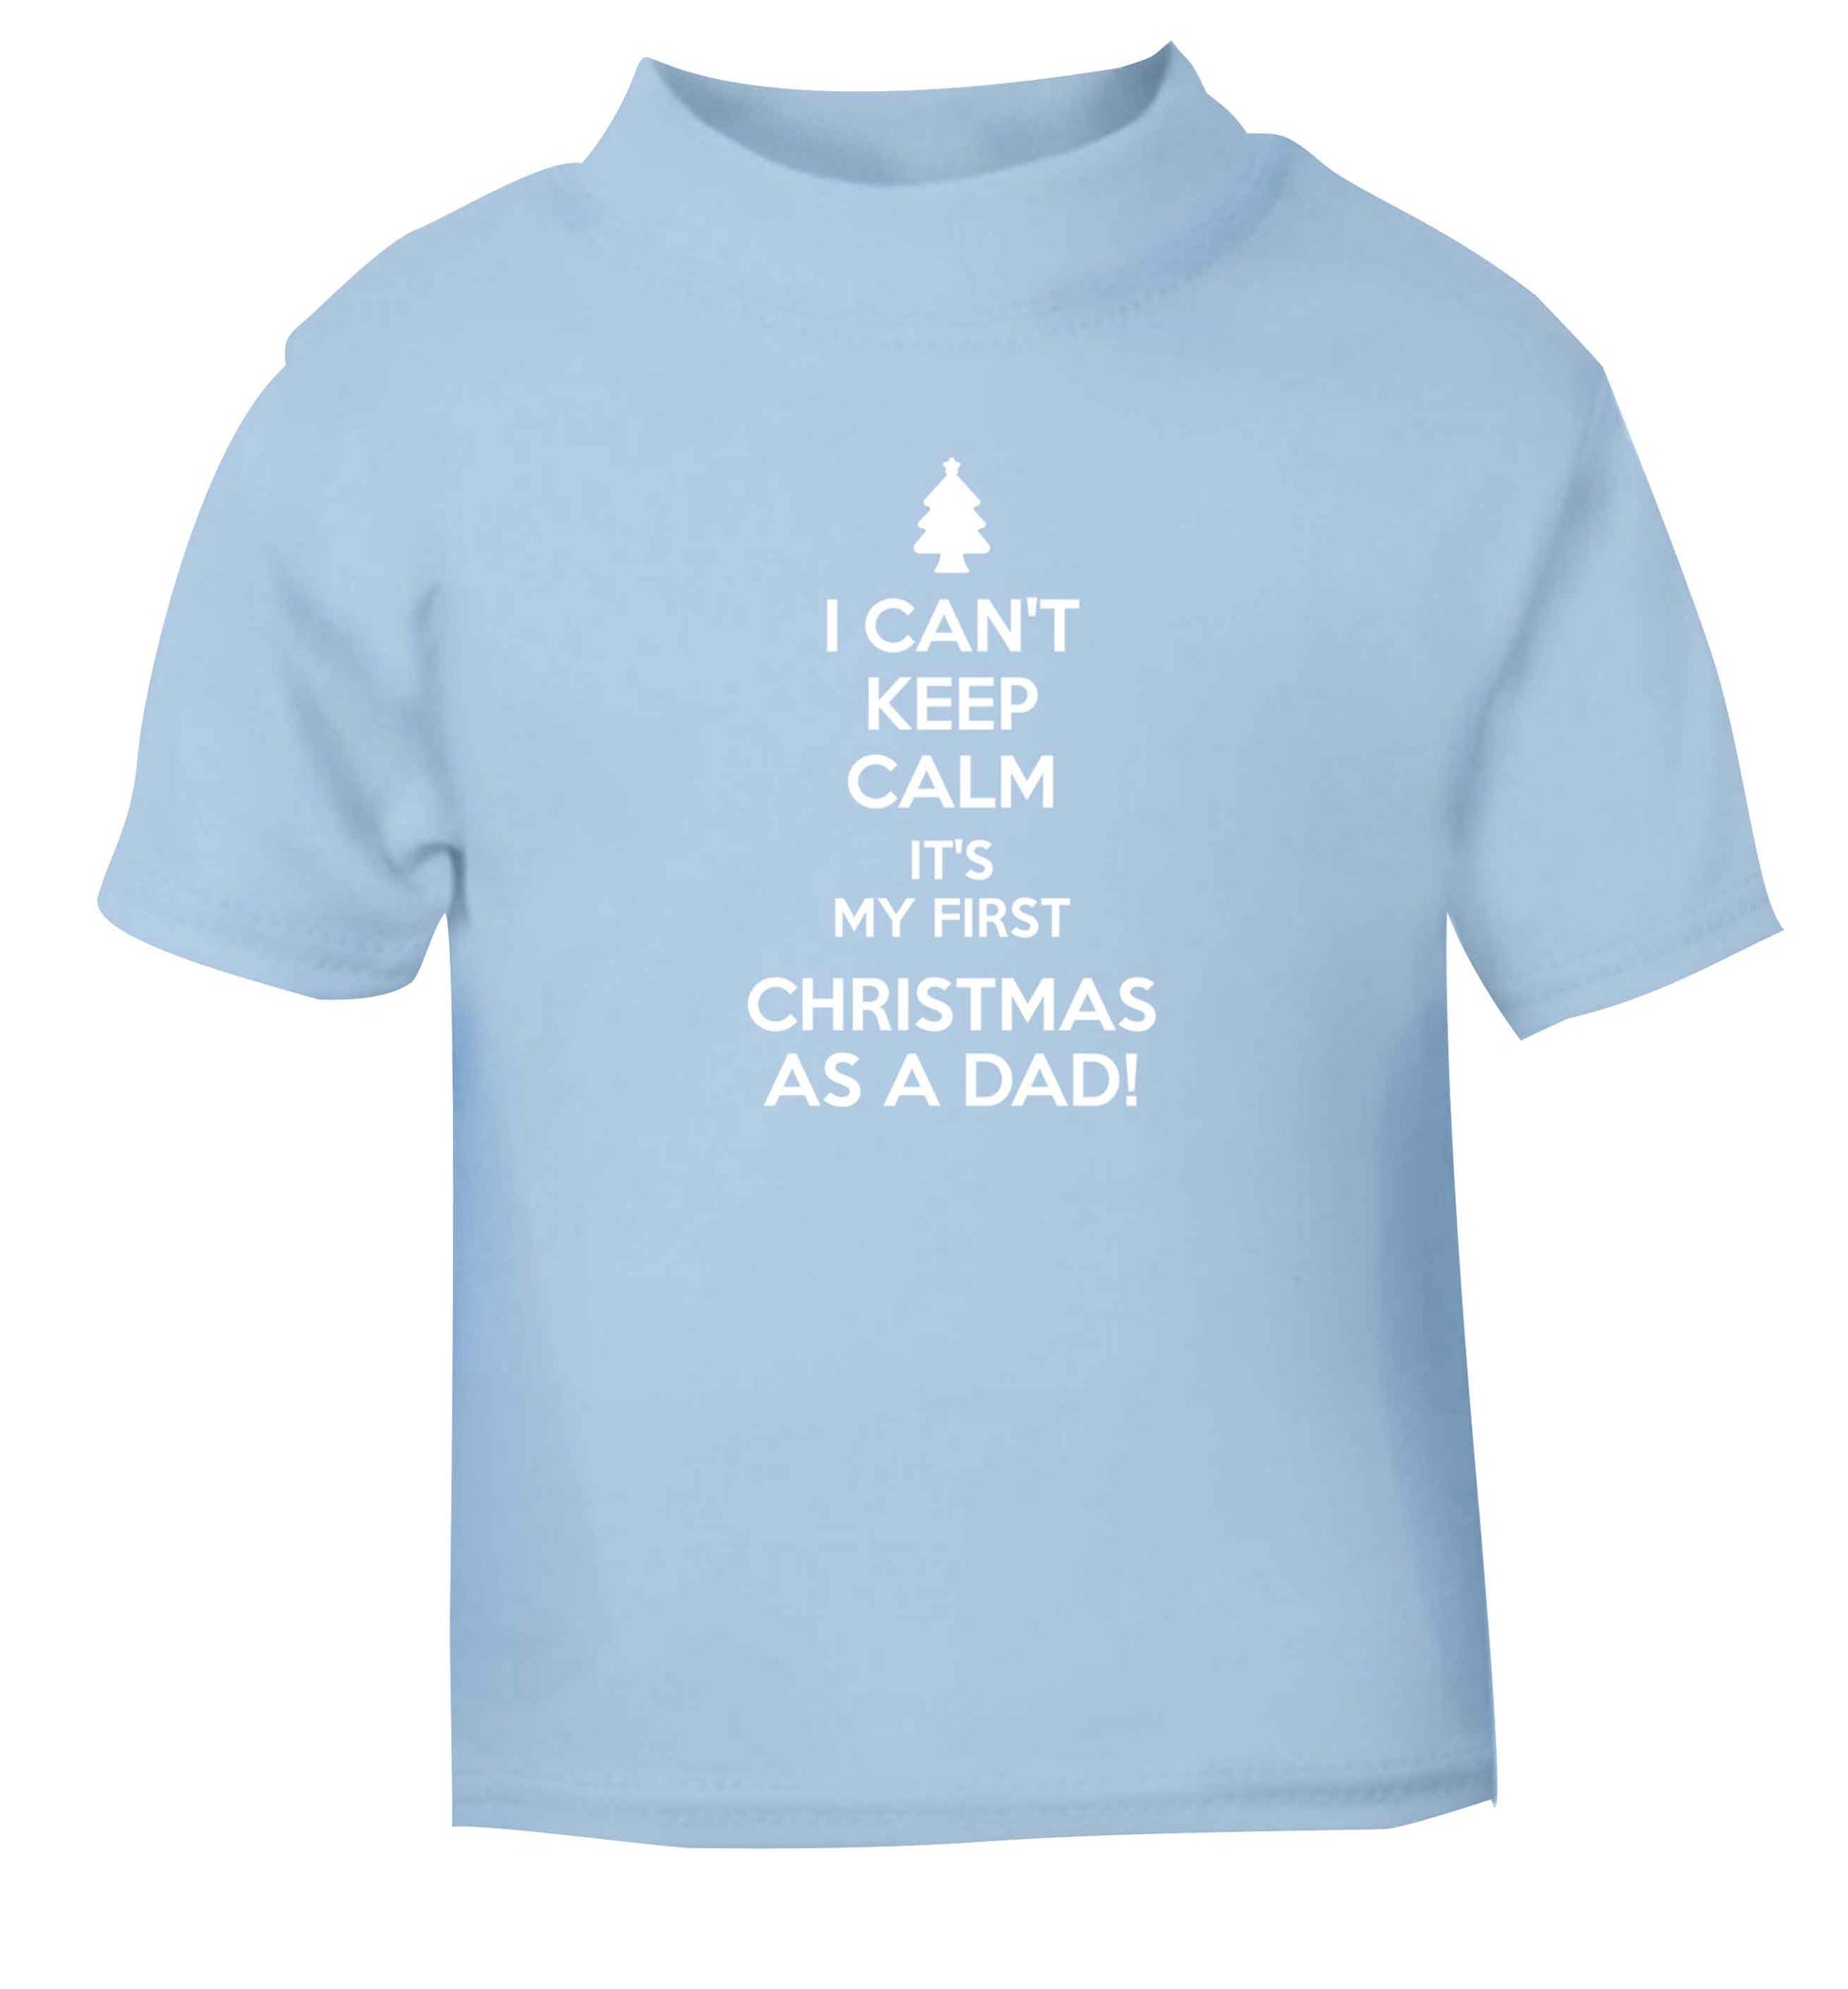 I can't keep calm it's my first Christmas as a dad light blue Baby Toddler Tshirt 2 Years